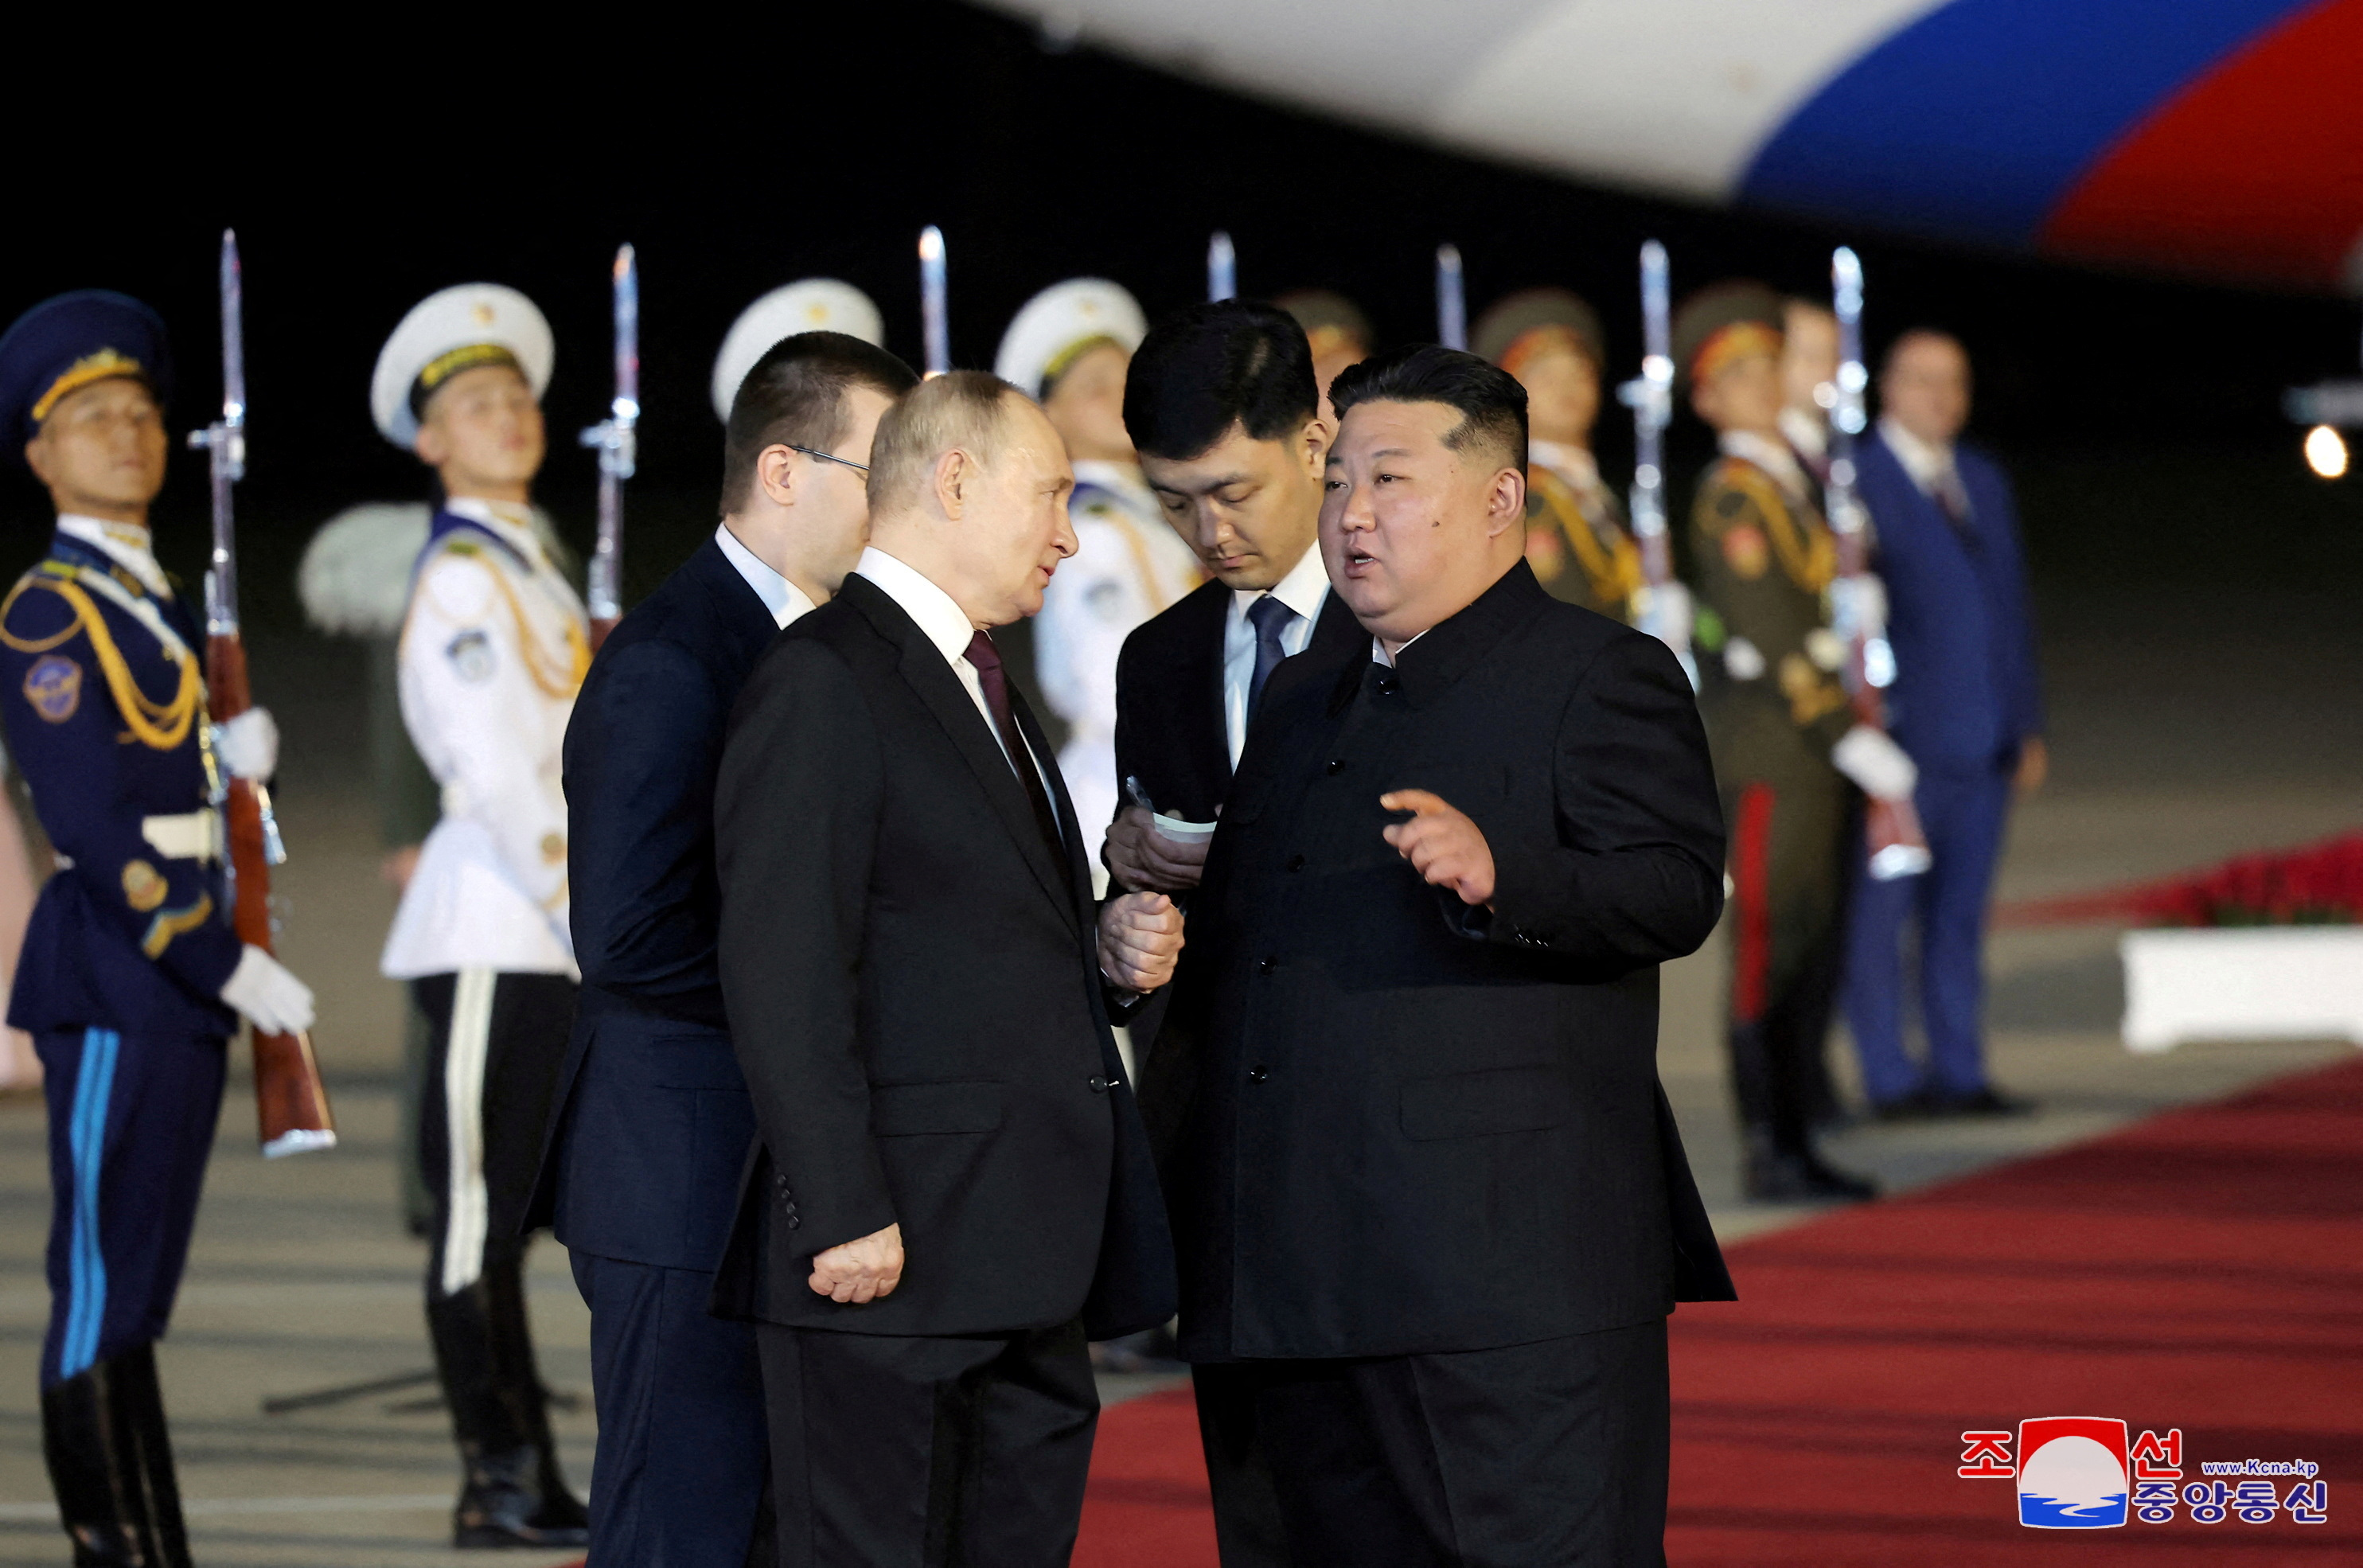 Kim Jong Un greeting Vladimir Putin at the airport. They're on a red carpet. There is an honour guard behind them. Kim is talking.